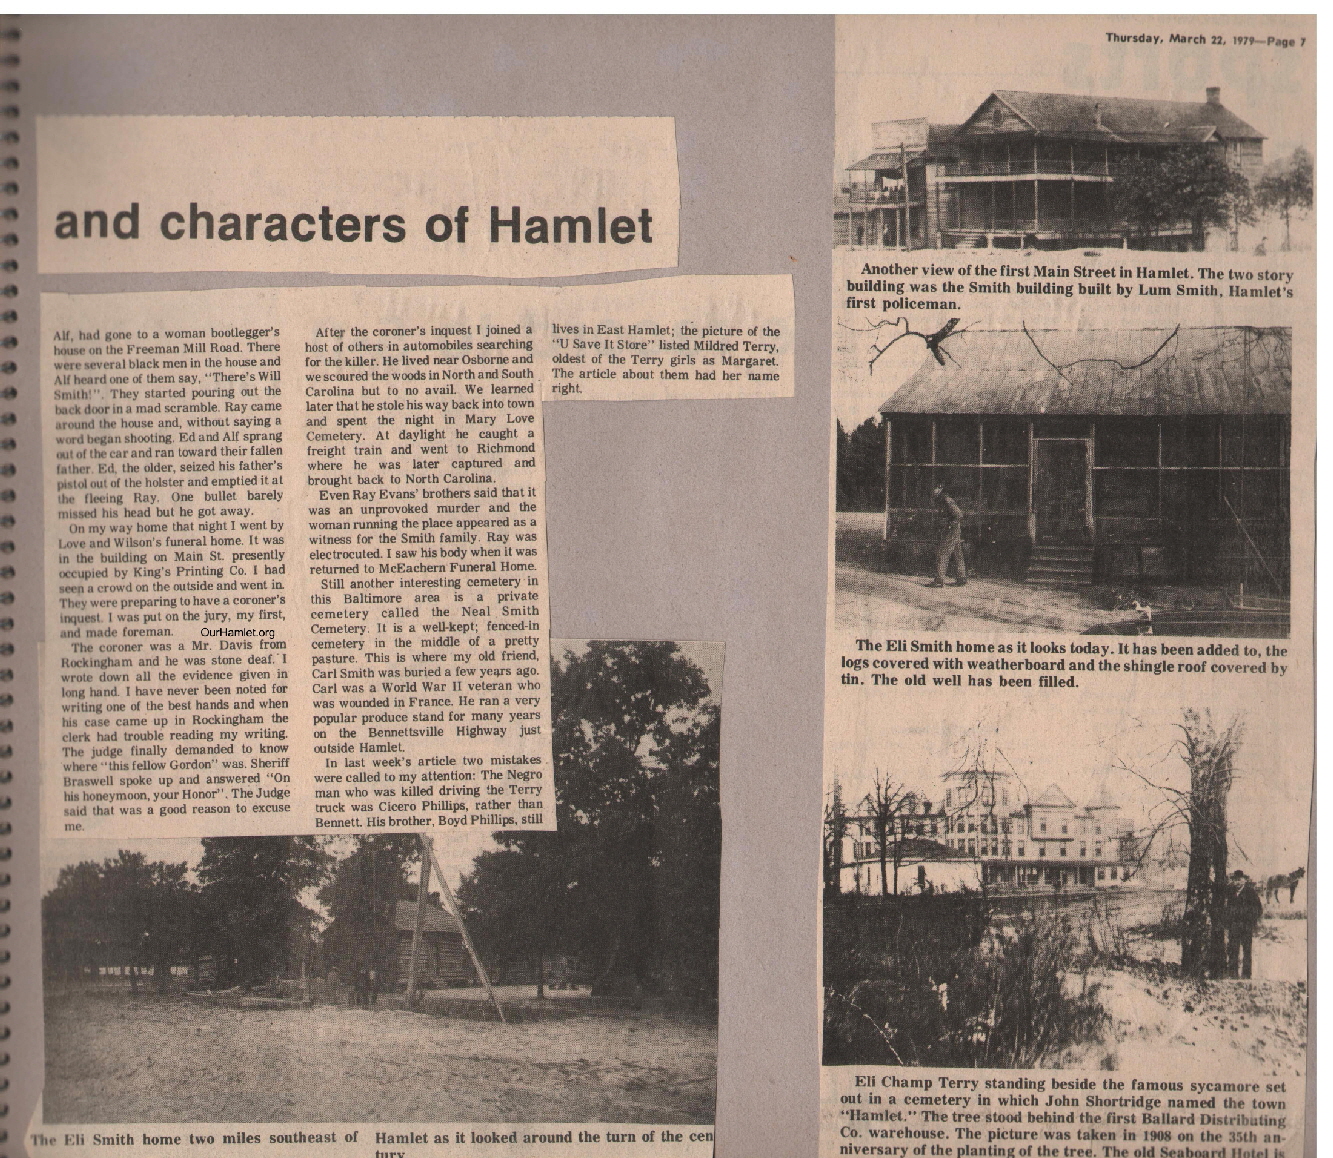 The Squire - Interesting Facts and Characters of Hamlet b OH